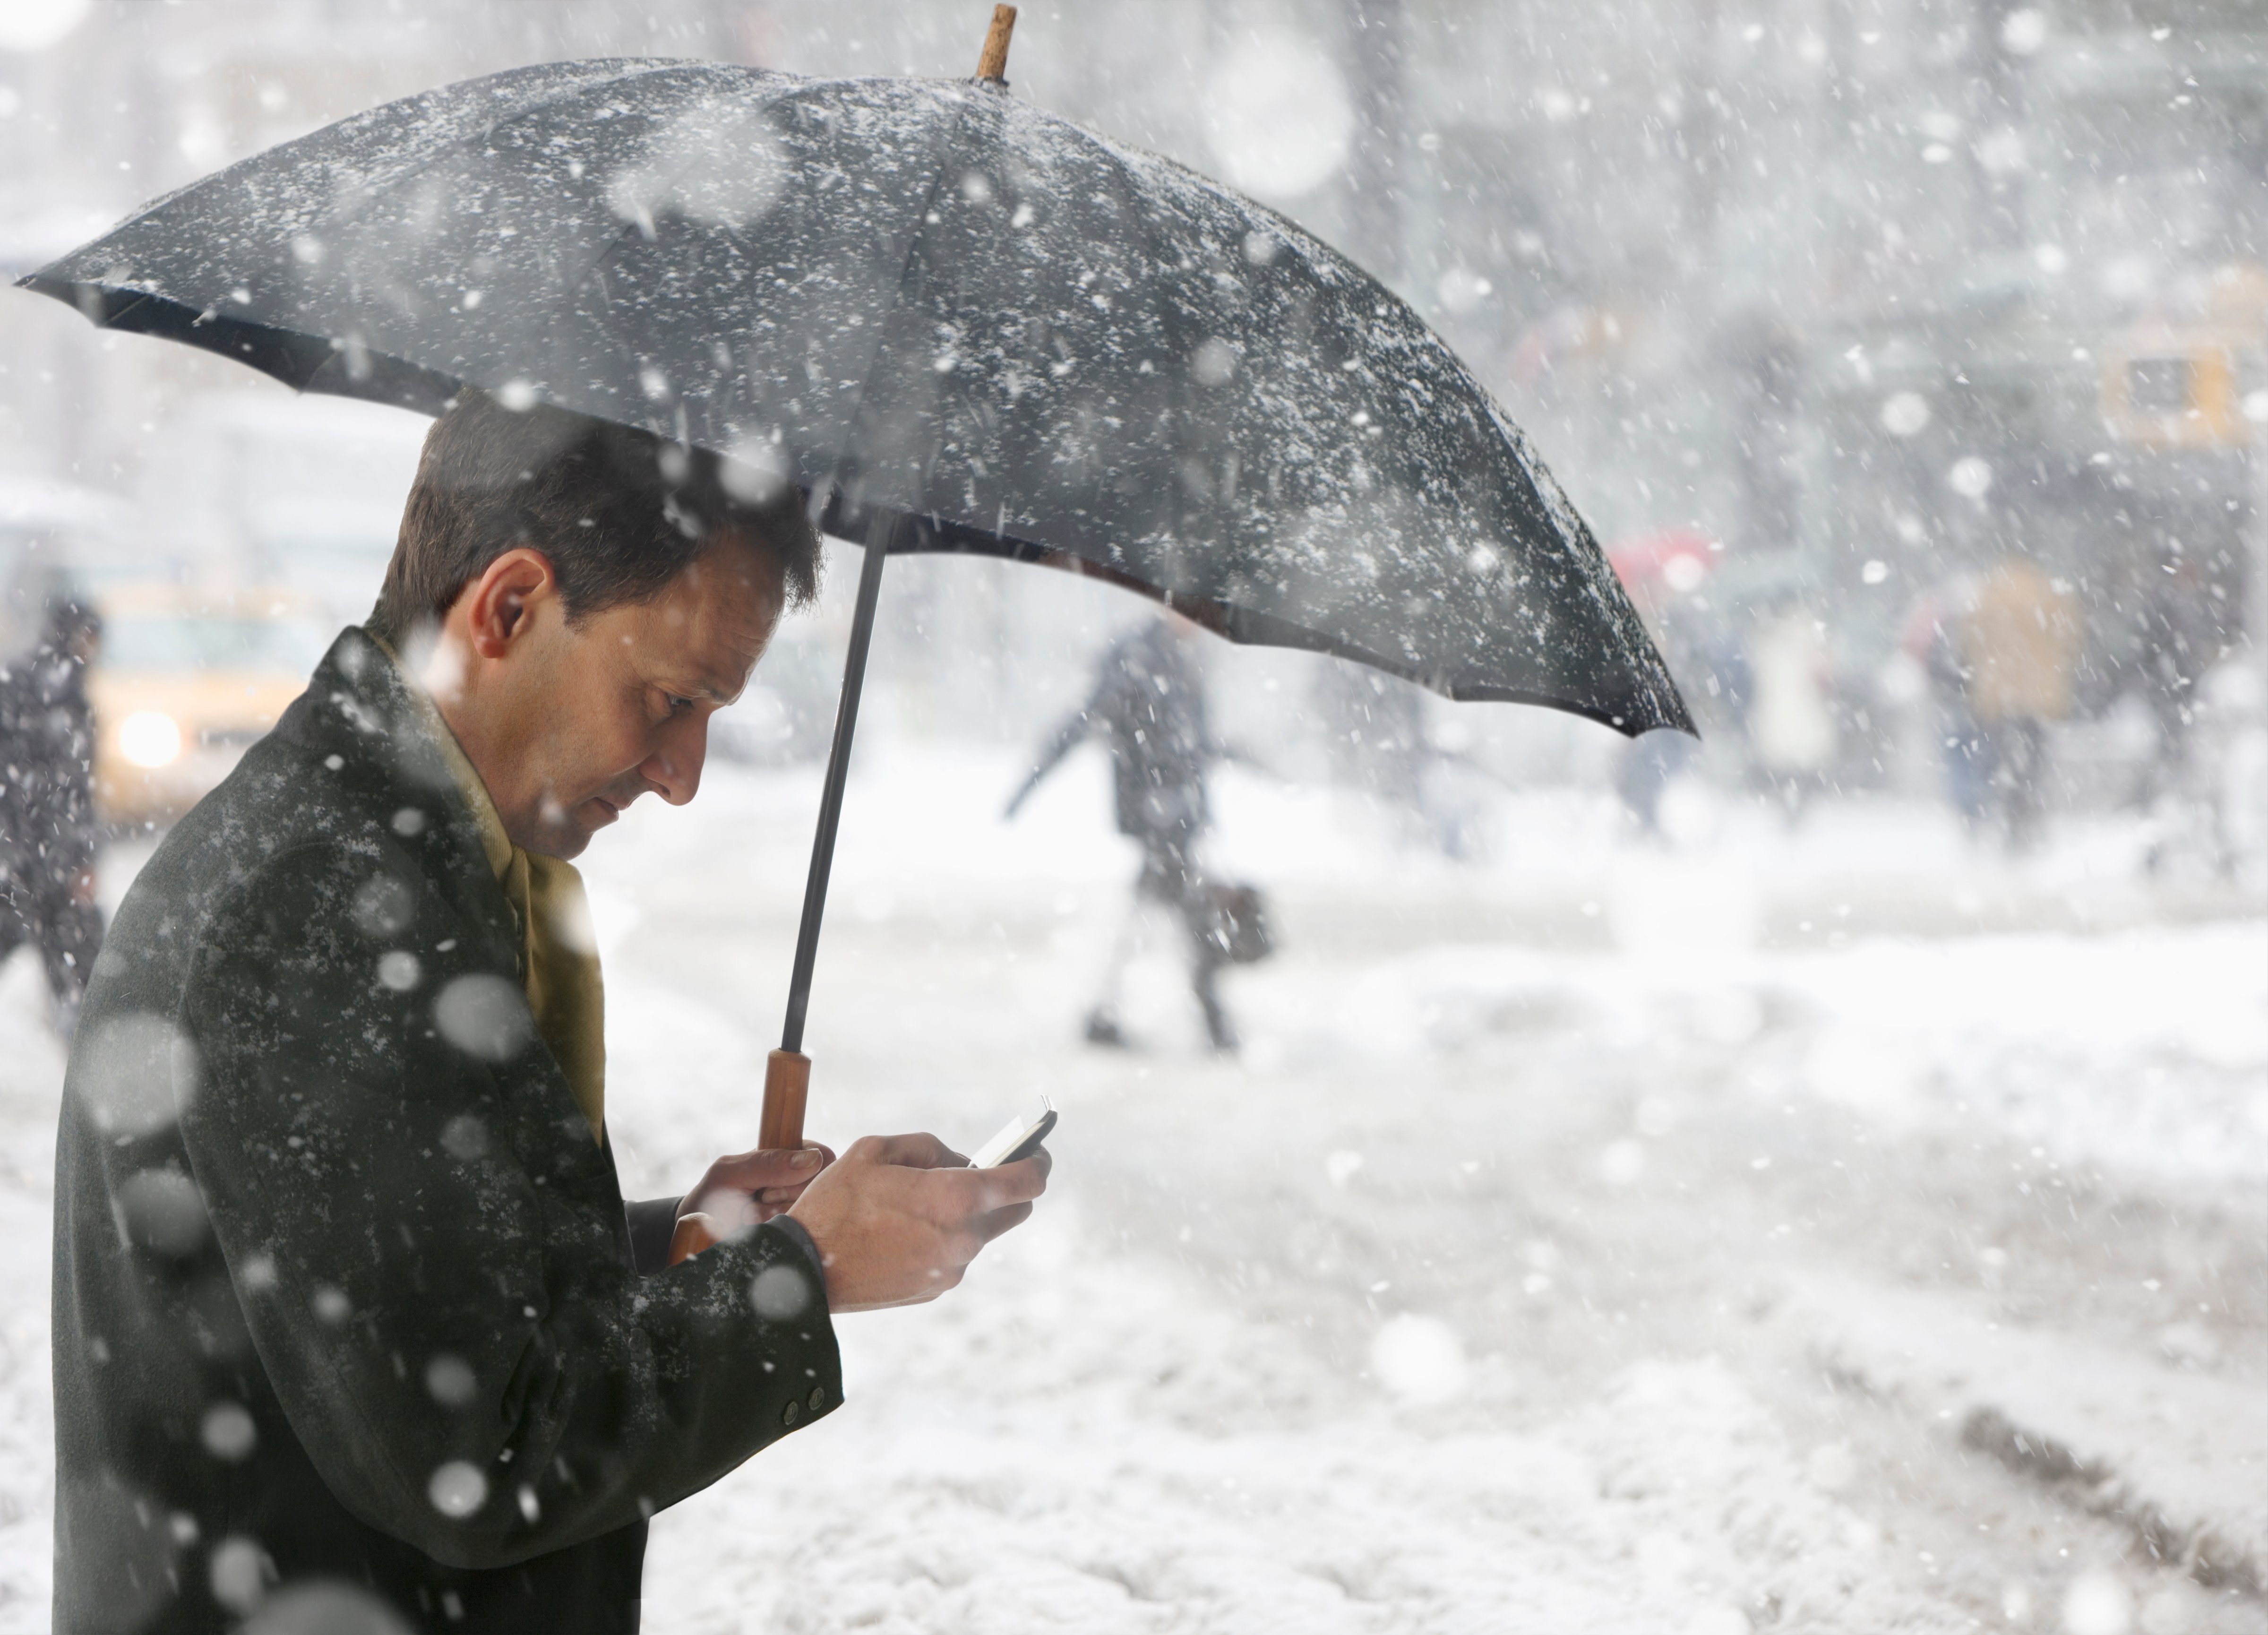 Experts say they aren't sure about what weather will look like this winter. (Jose Luis Pelaez&mdash;Getty Images)